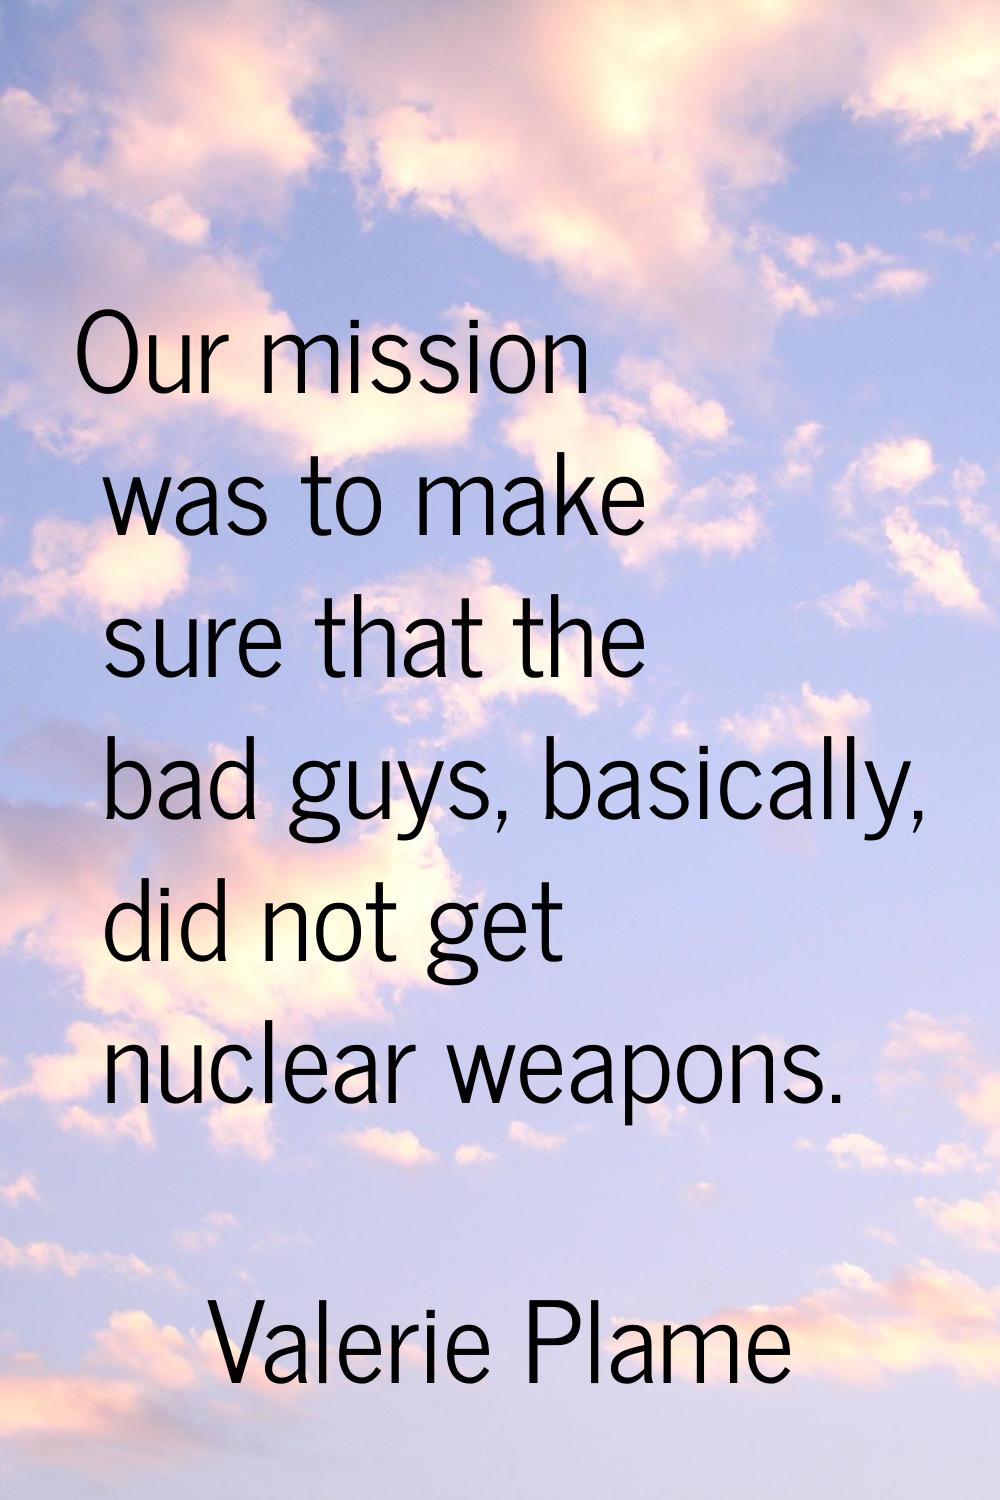 Our mission was to make sure that the bad guys, basically, did not get nuclear weapons.